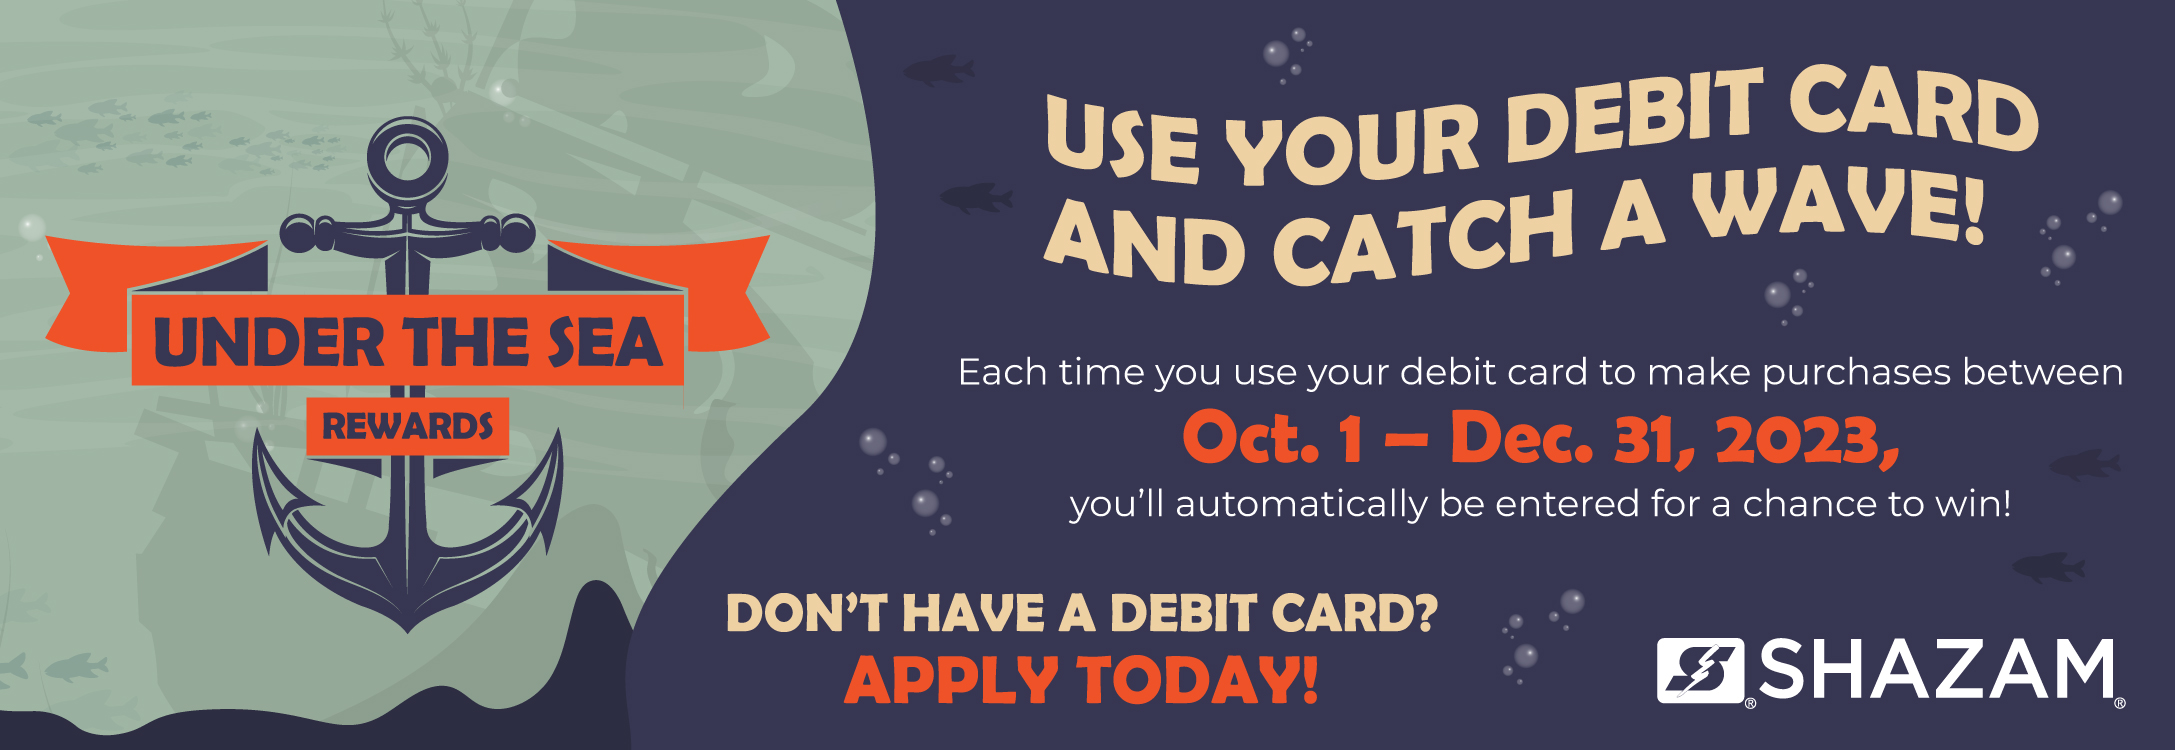 Under the Sea Rewards. Use your debit card and catch a wave! each time you use your debit card to make a purchase between October 1 and December 31, 2023 you'll be entered for a chance to win! Don't have a debit card? Apply today!